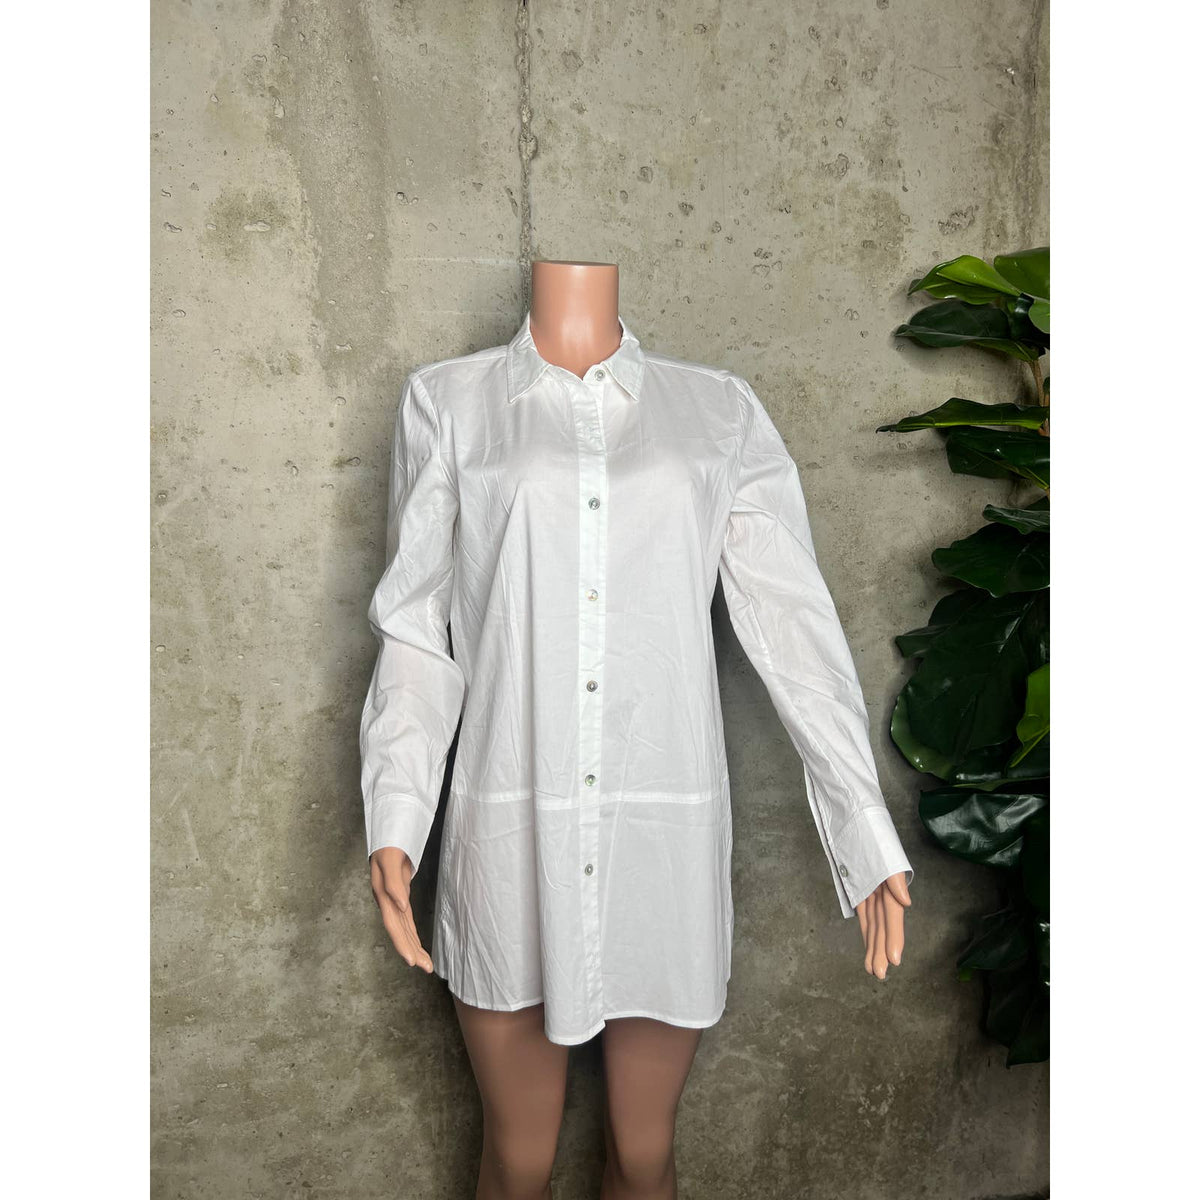 Eileen Fisher White Button-Up Blouse Sz. Small